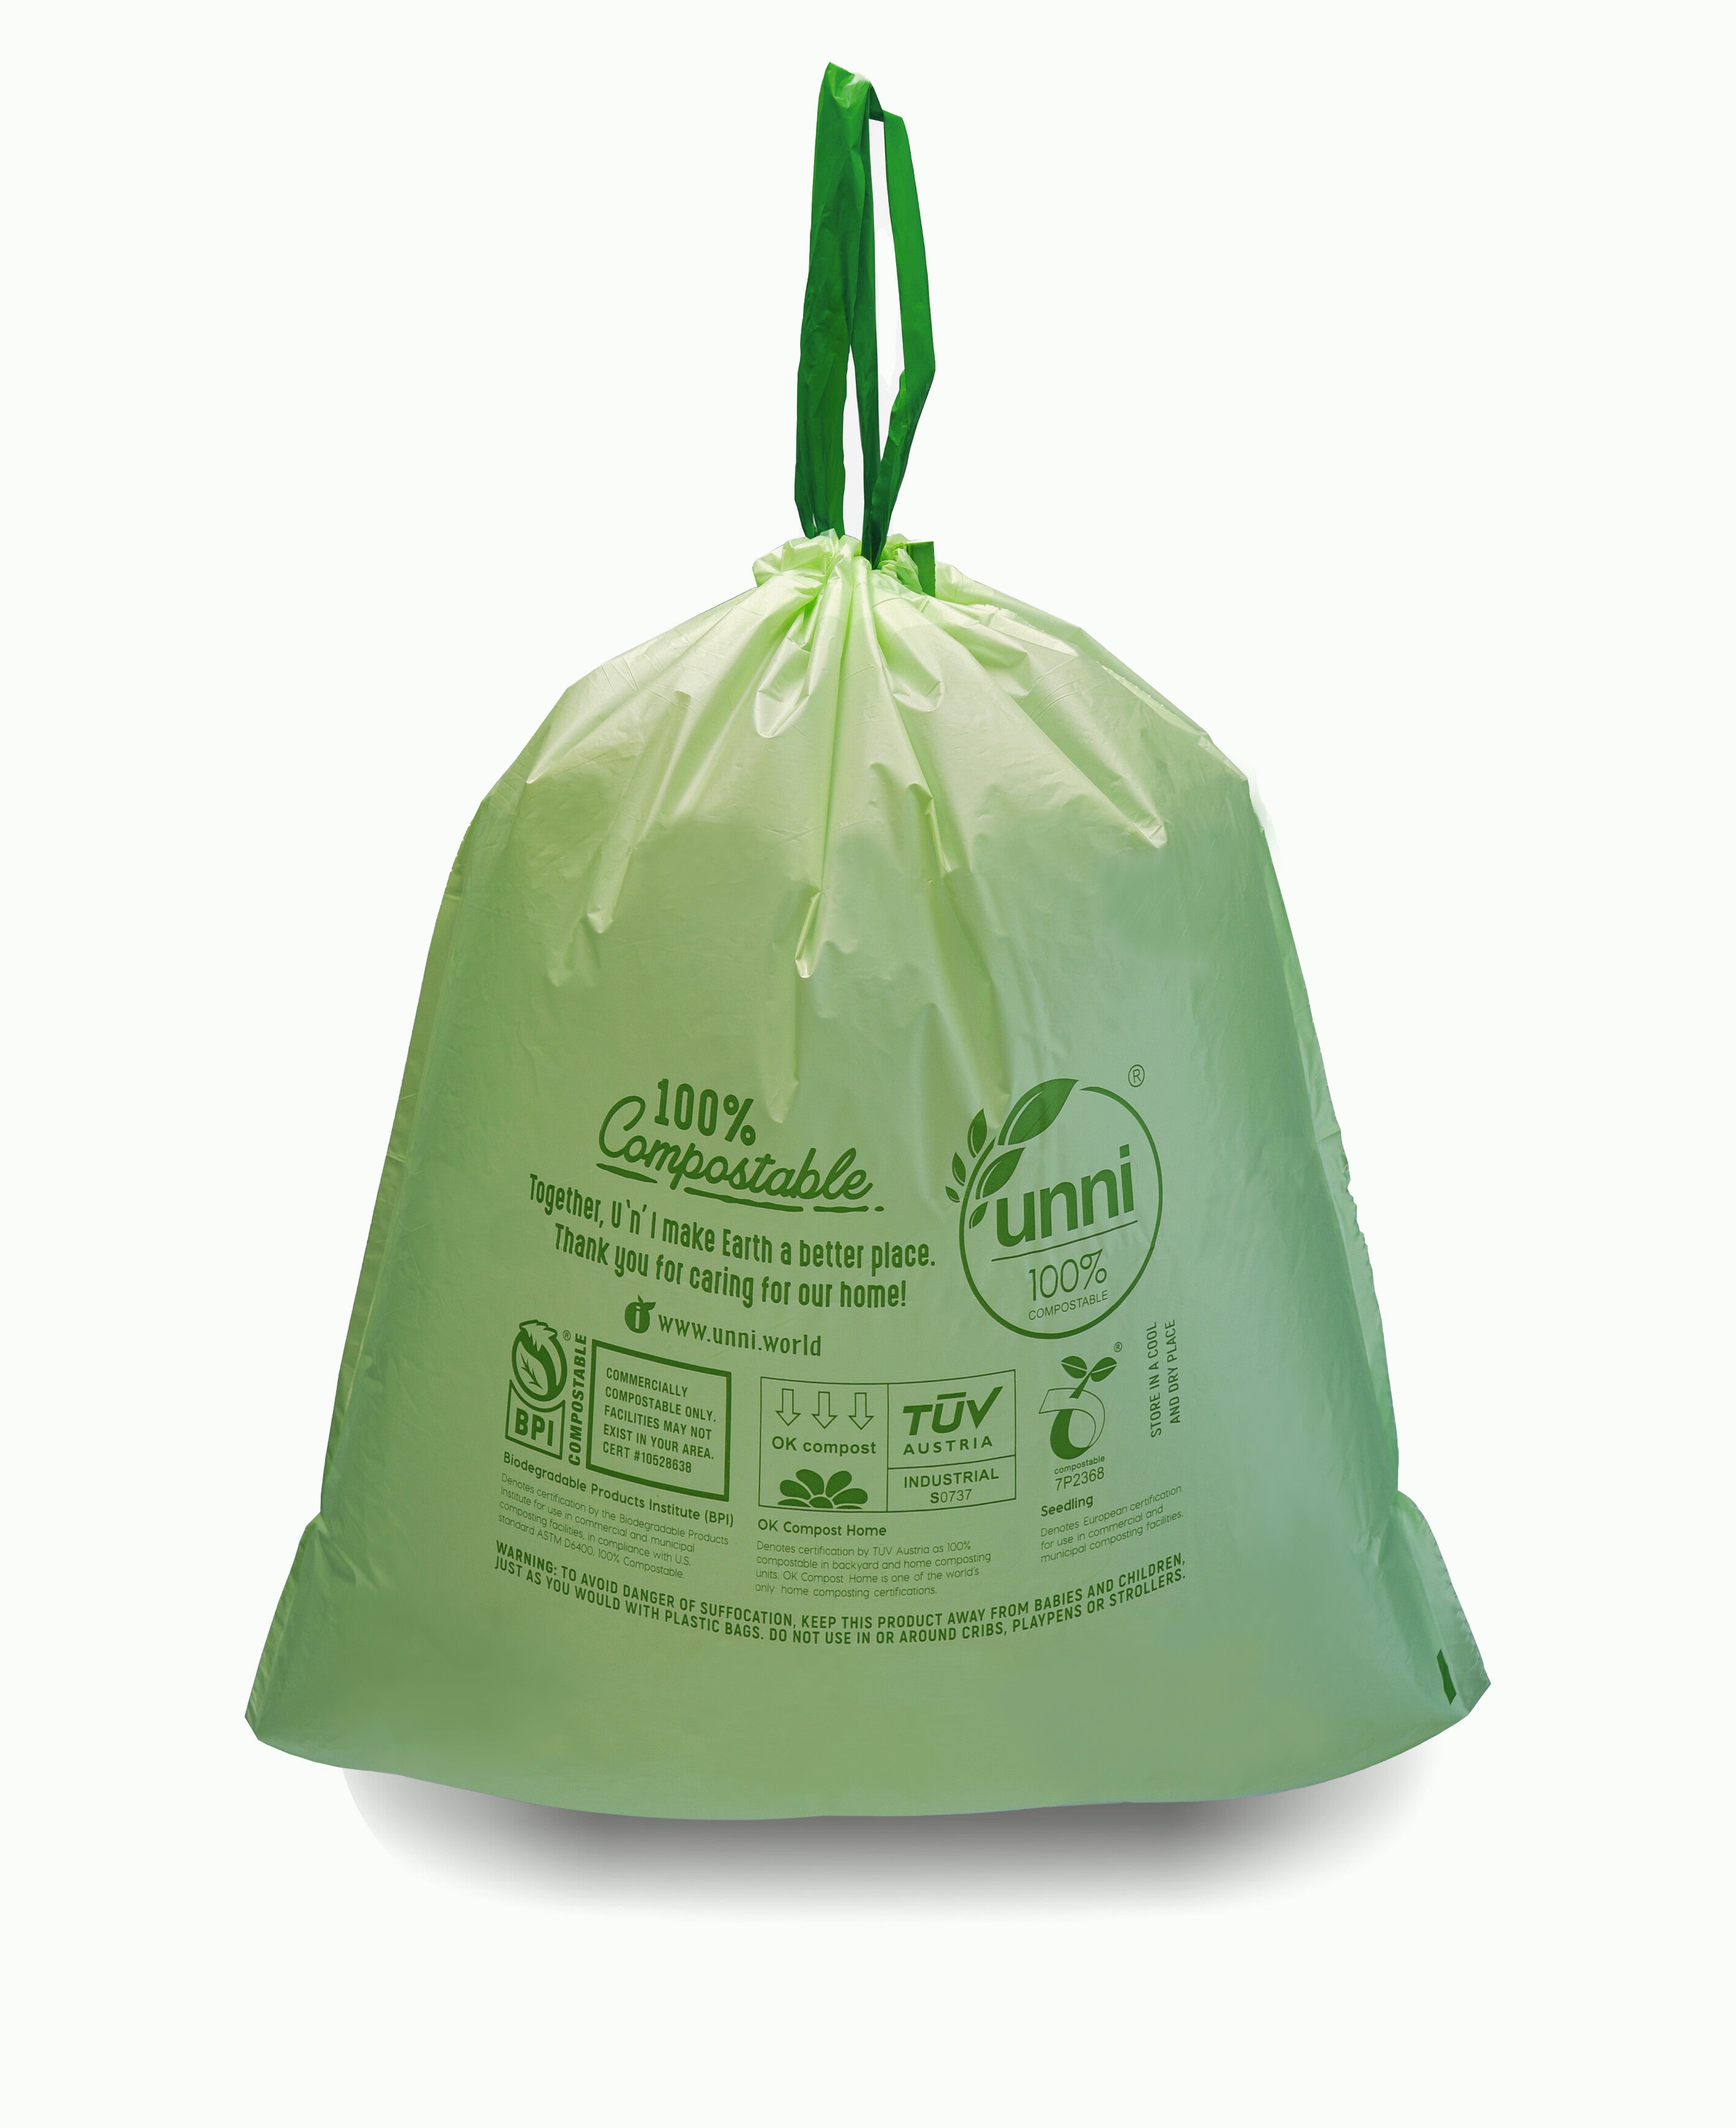 Moonygreen Compostable Trash Bags 13 Gallon, Tall Kitchen Heavey Duty Food  Waste Bags, Extra Thick 1.1 Mils, Certified US BPI ASTM D6400, 49.2 Liter